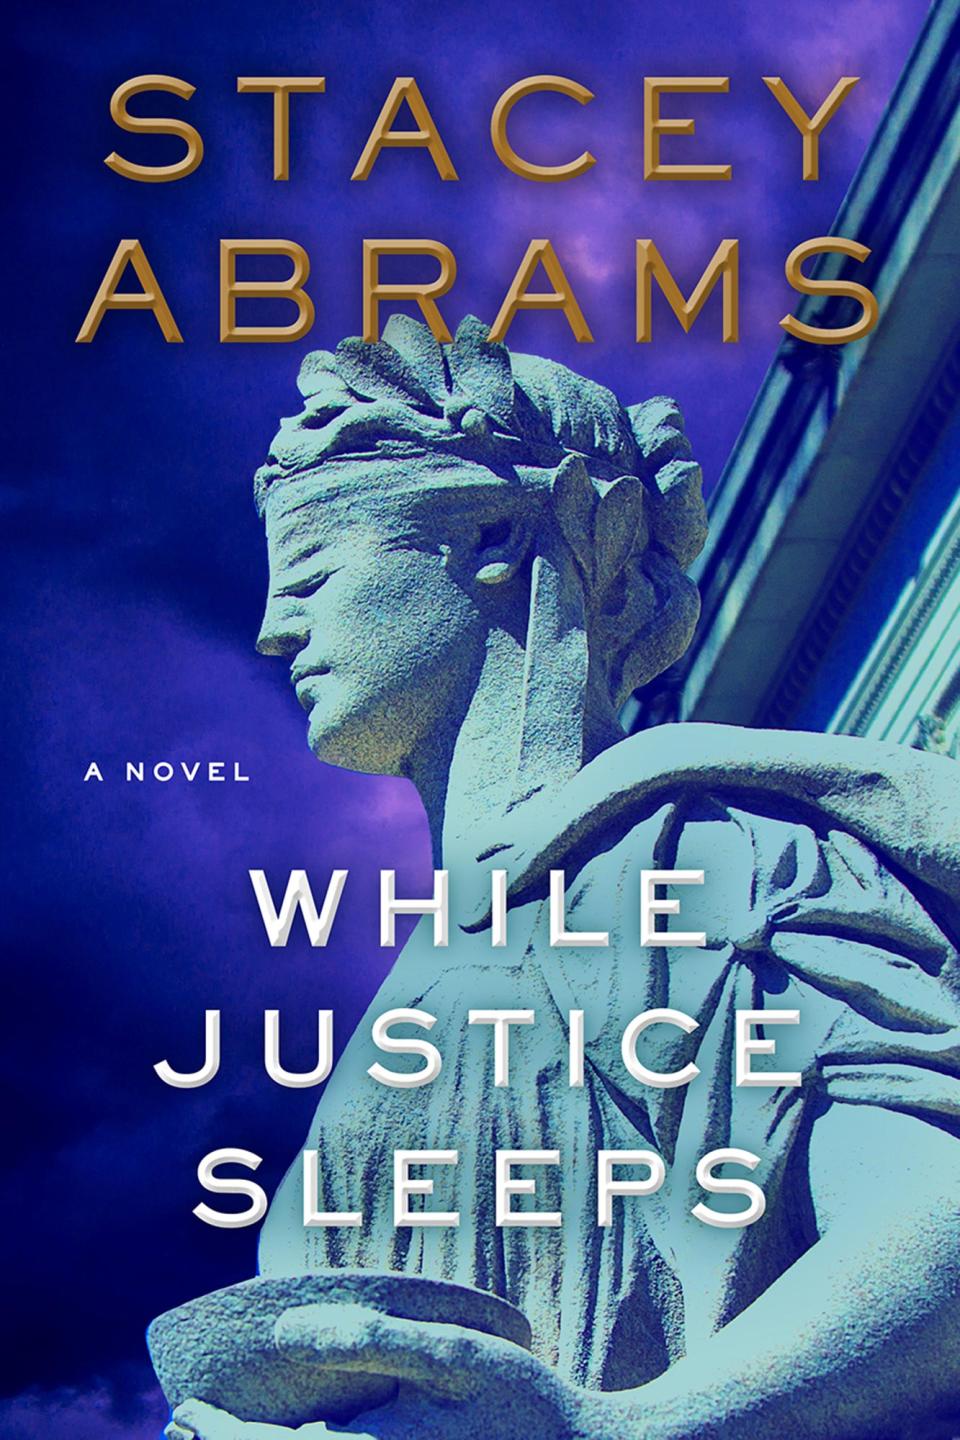 <i>While Justice Sleeps</i>, by Stacey Abrams